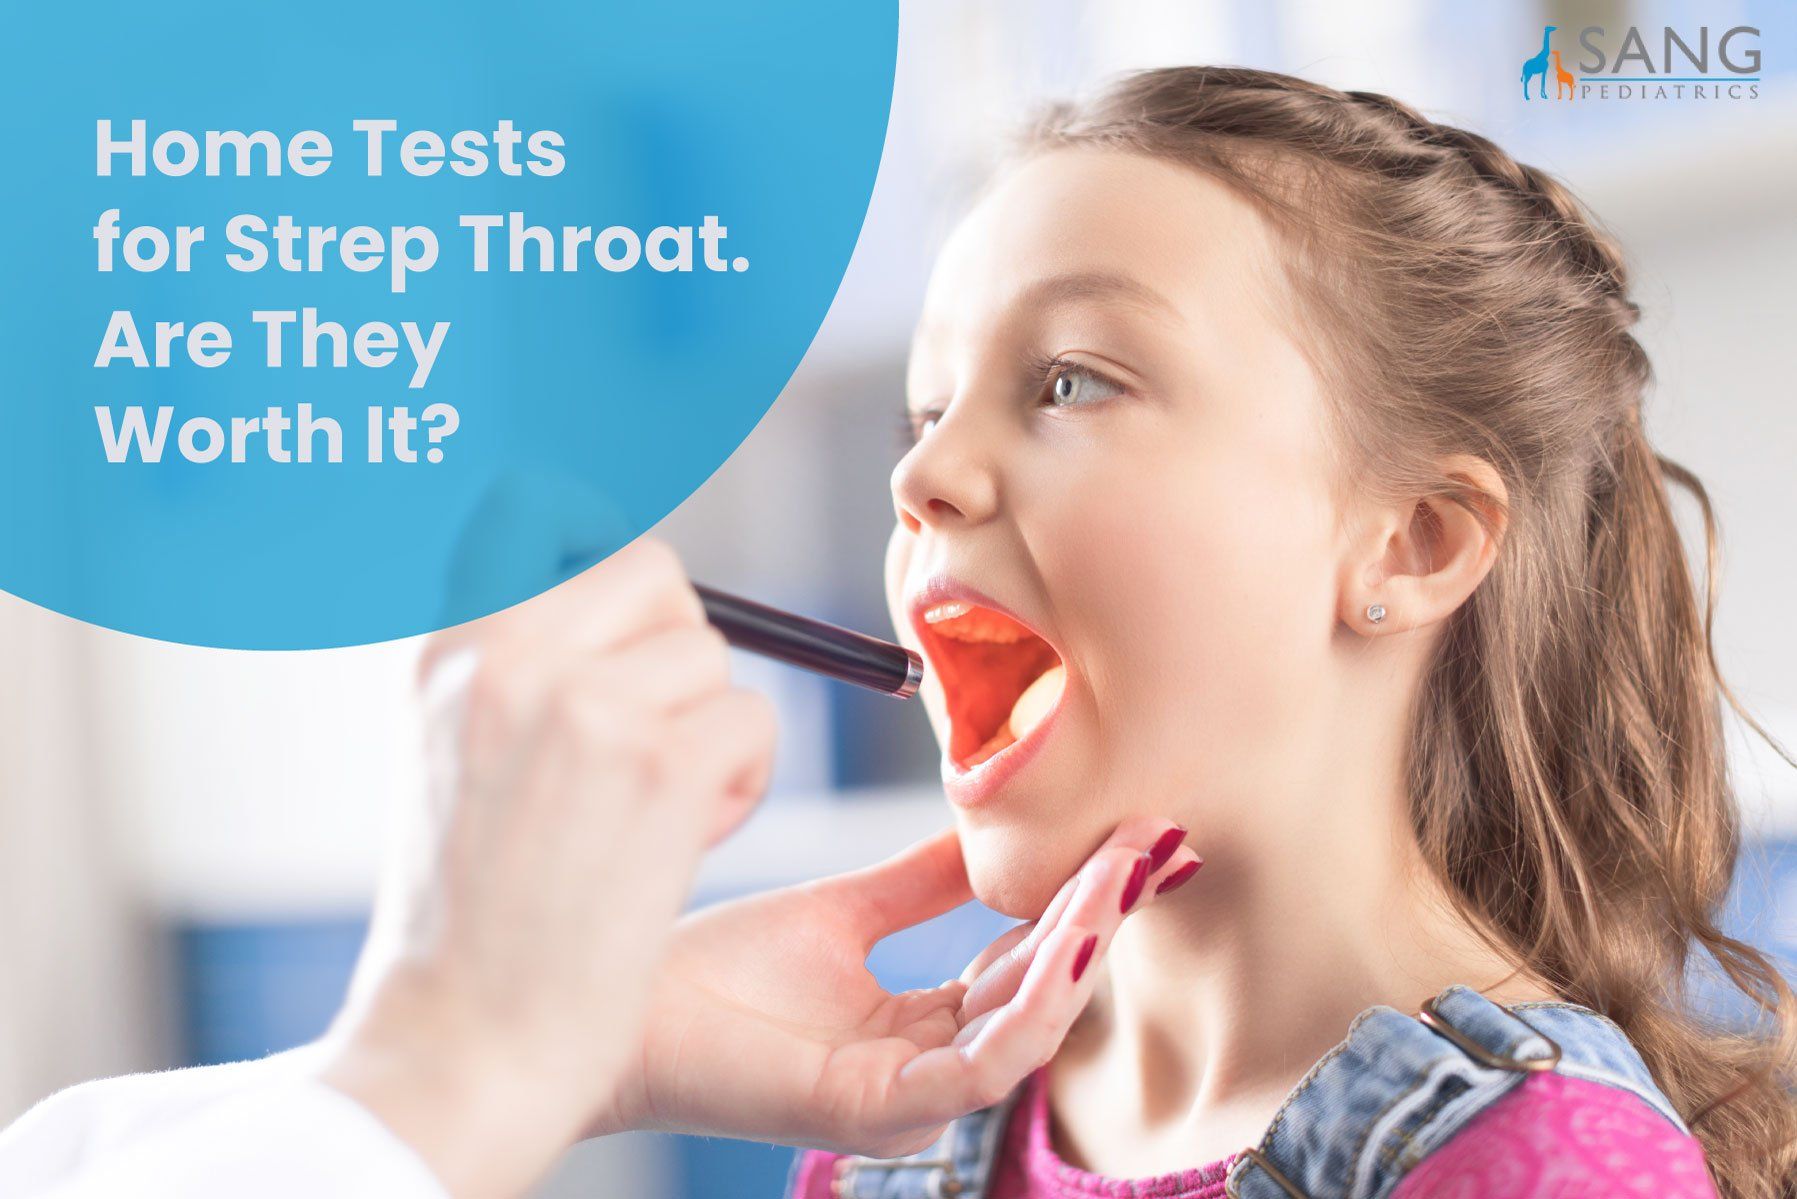 Home Tests for Strep Throat. Are They Worth It?